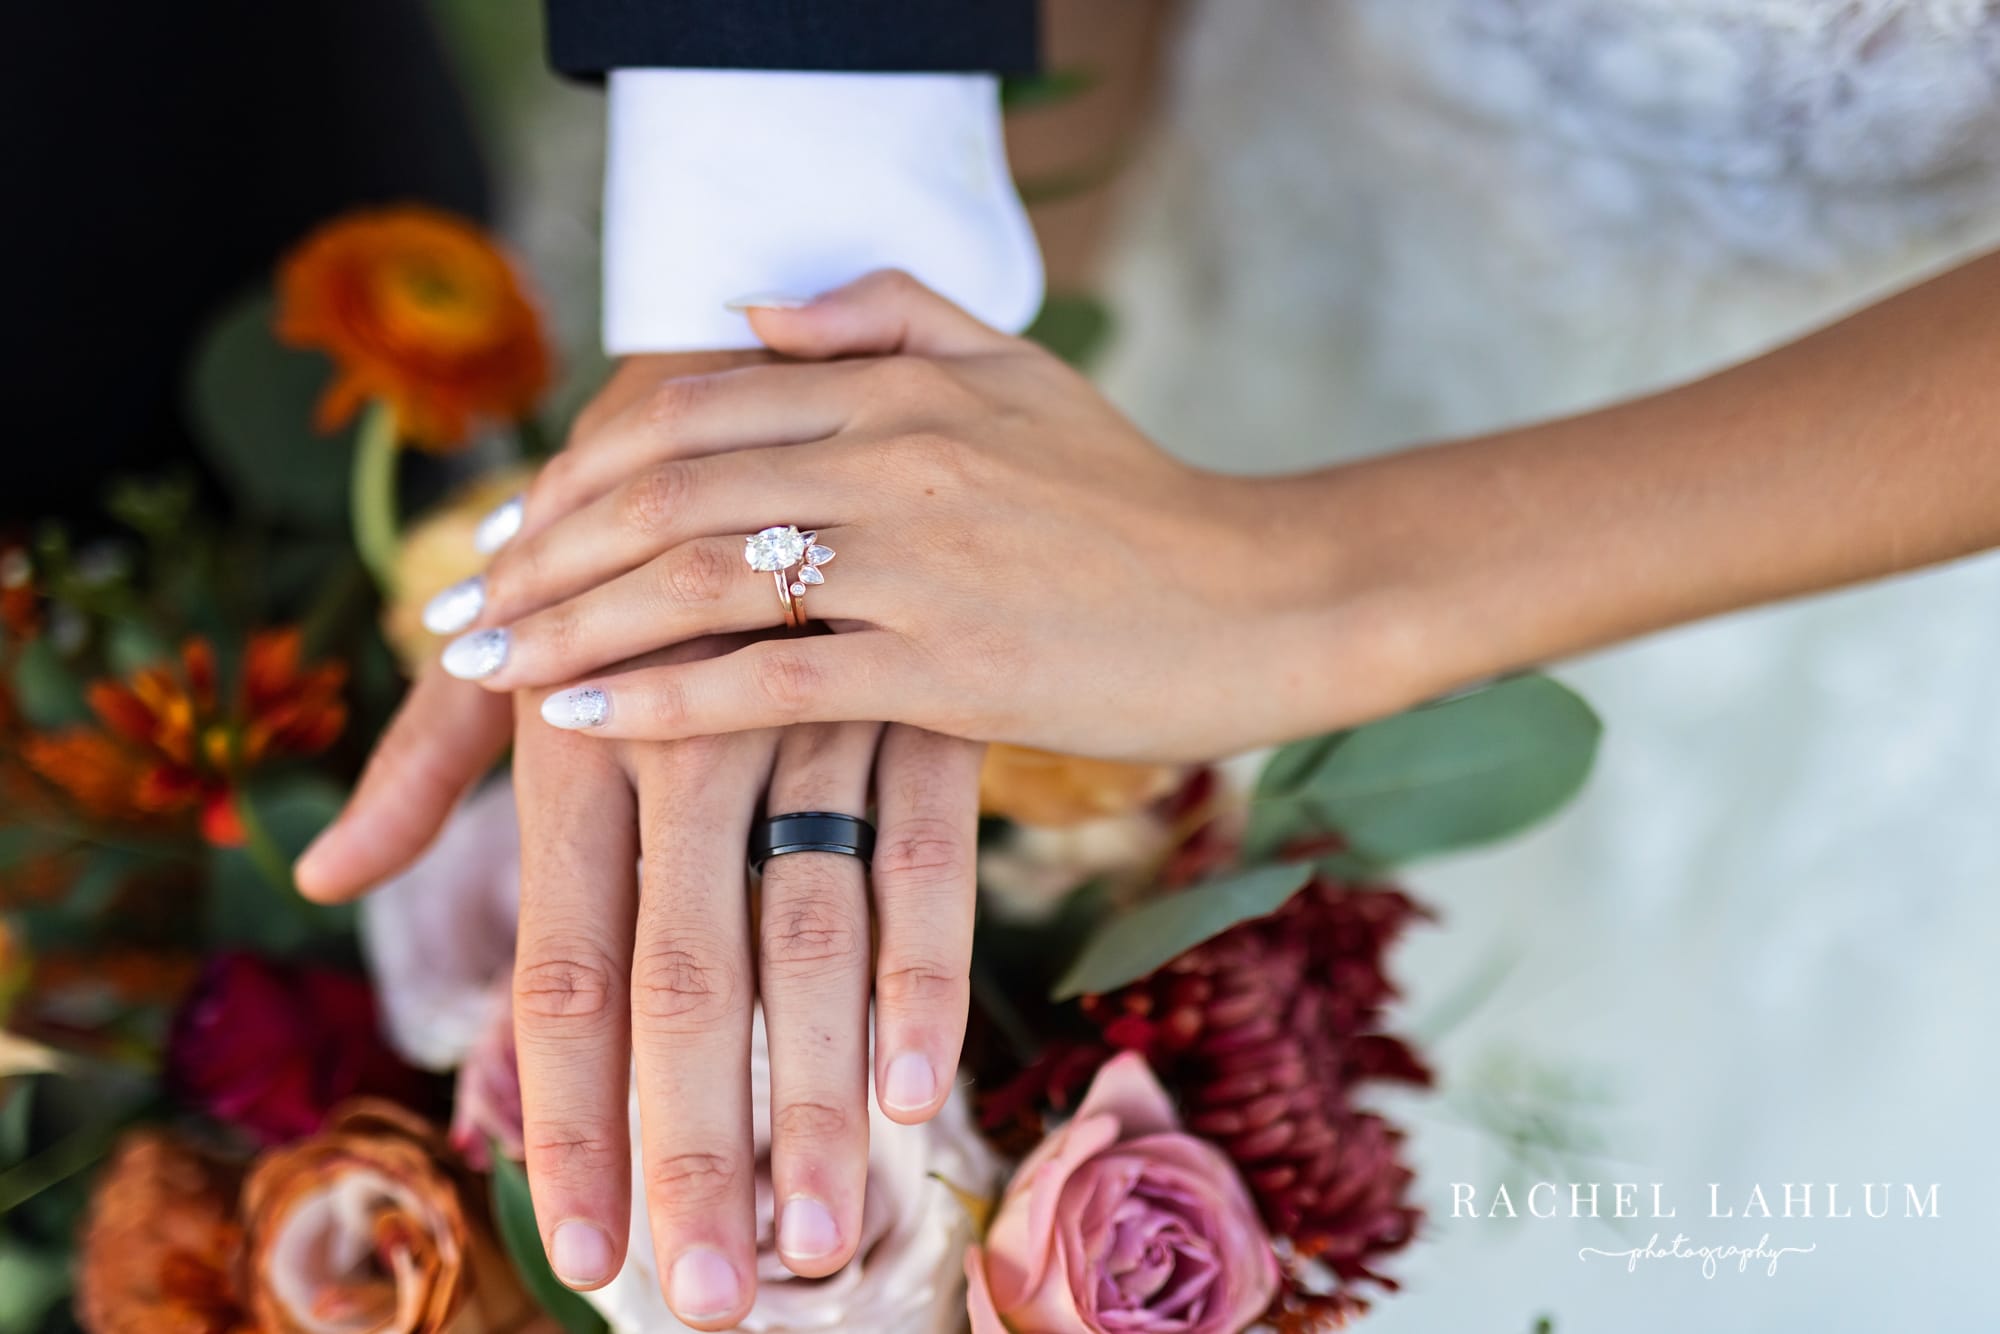 Bride’s hand lies on top of grooms hand showing wedding rings over the bouquet.